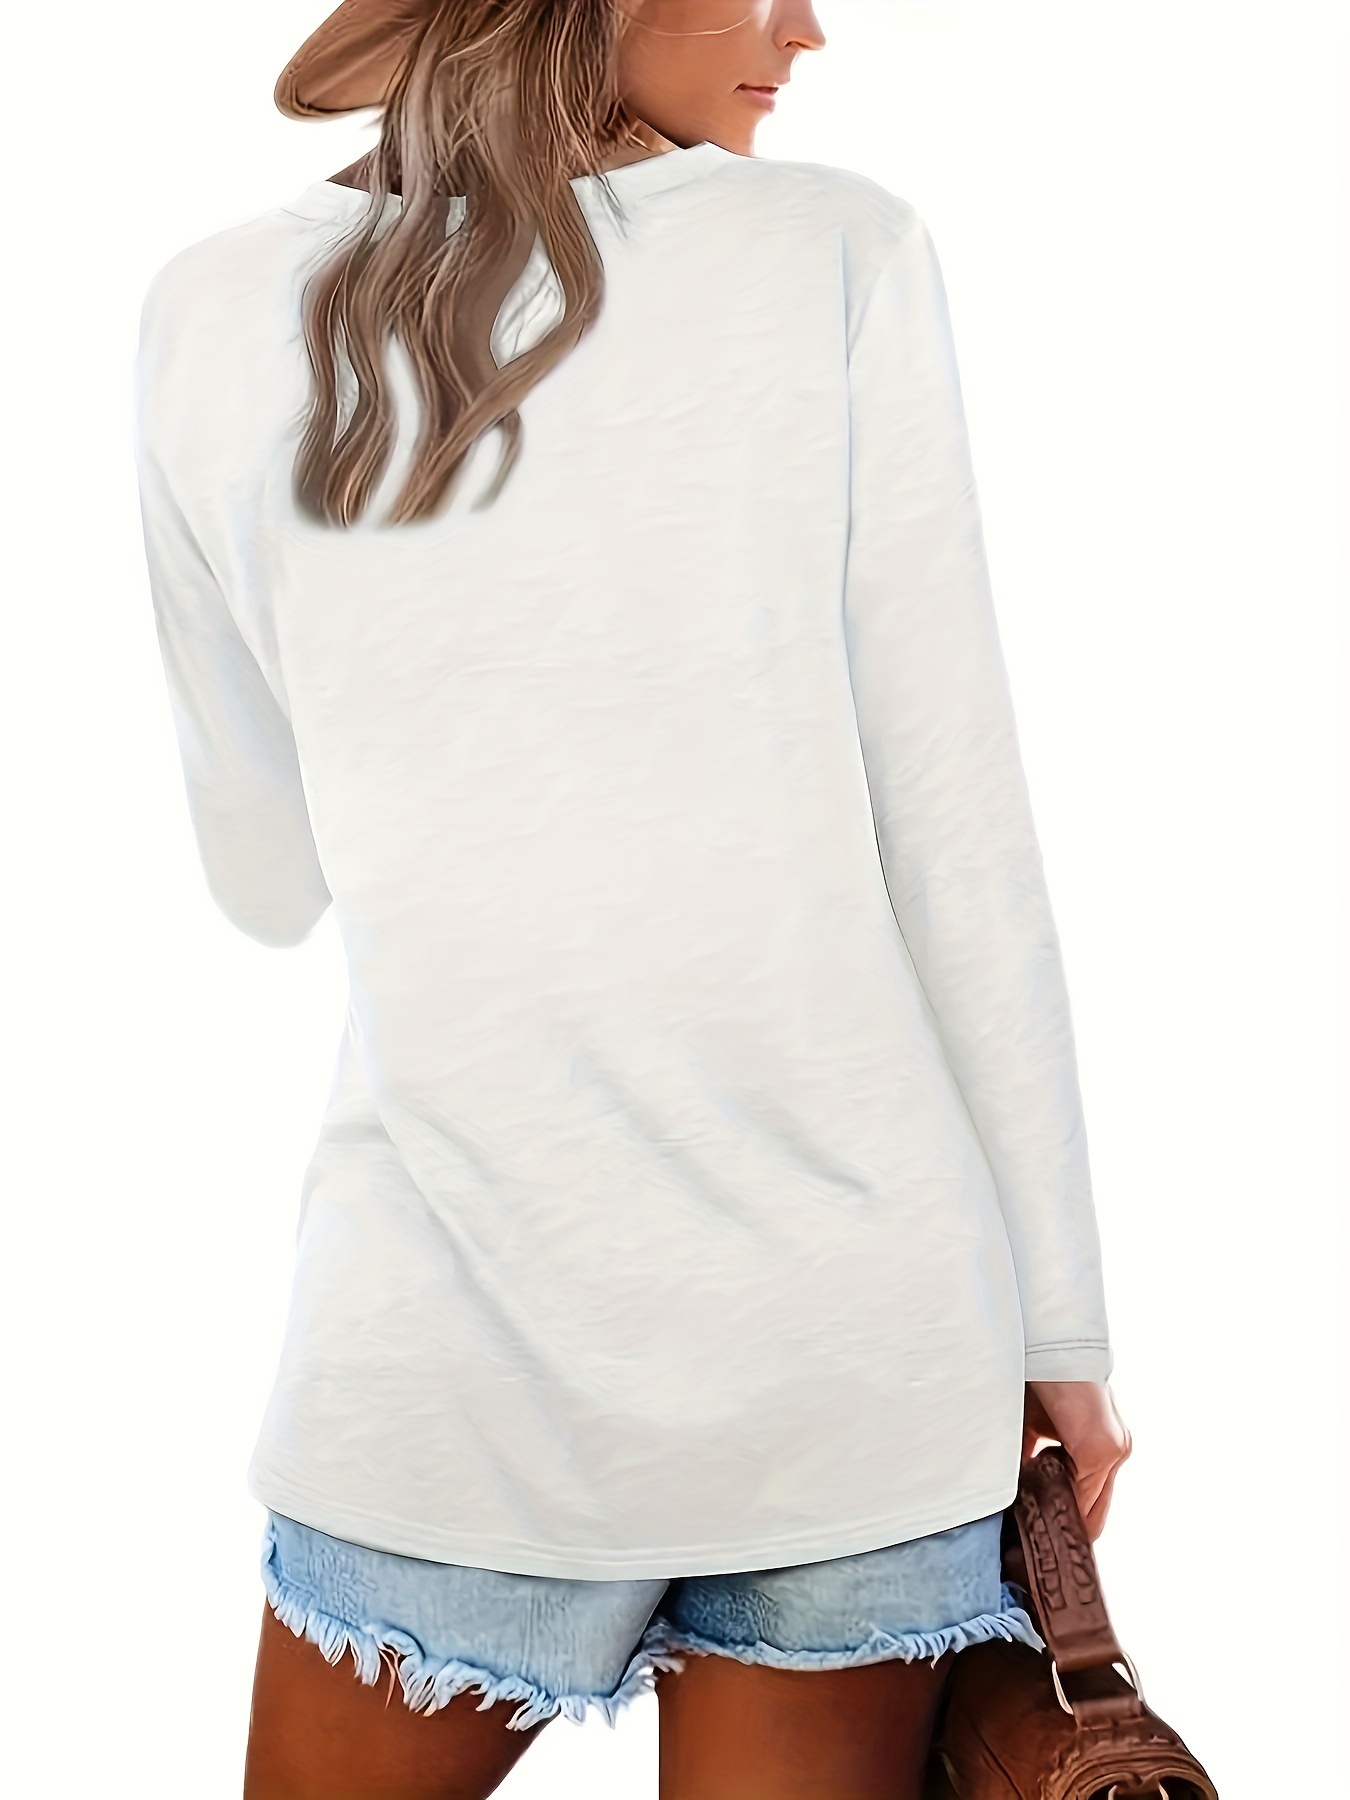 Oversized Plus Size Women Casual Loose Long Sleeve Tops T Shirts